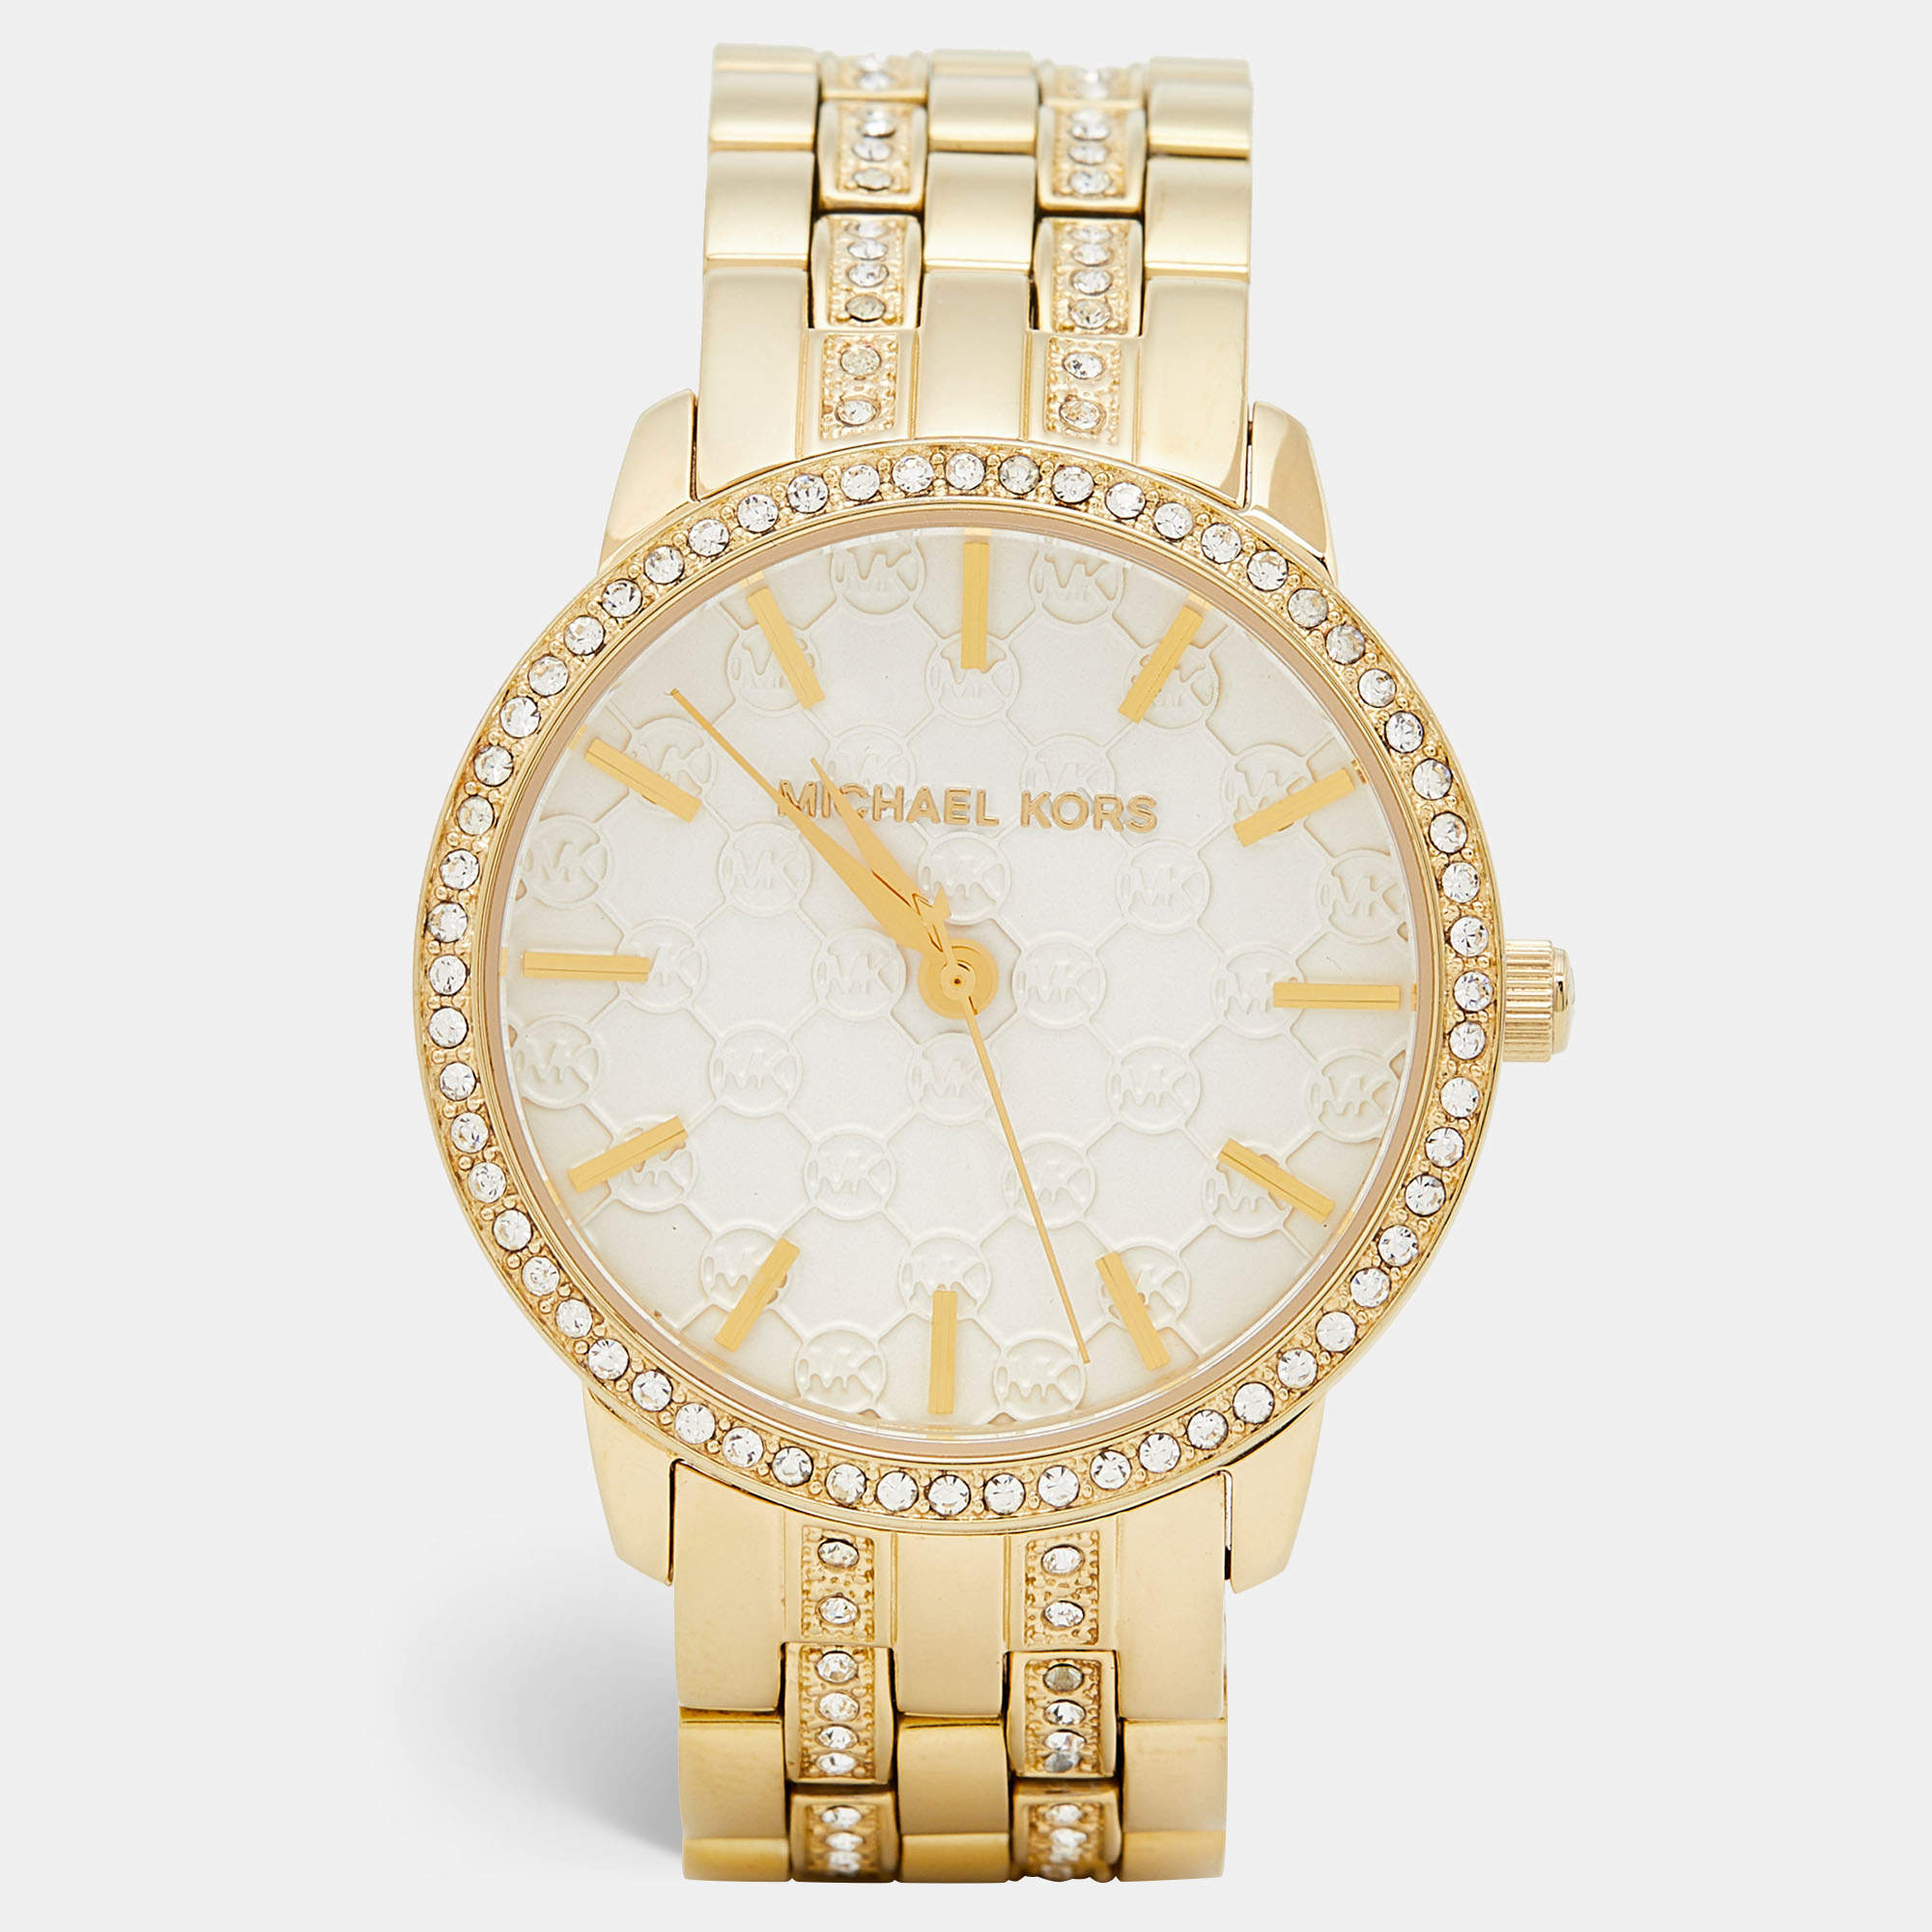 Michael Kors White Crystal Embellished Gold Plated Stainless Steel Nini MK3214 Women's Wristwatch 35 mm